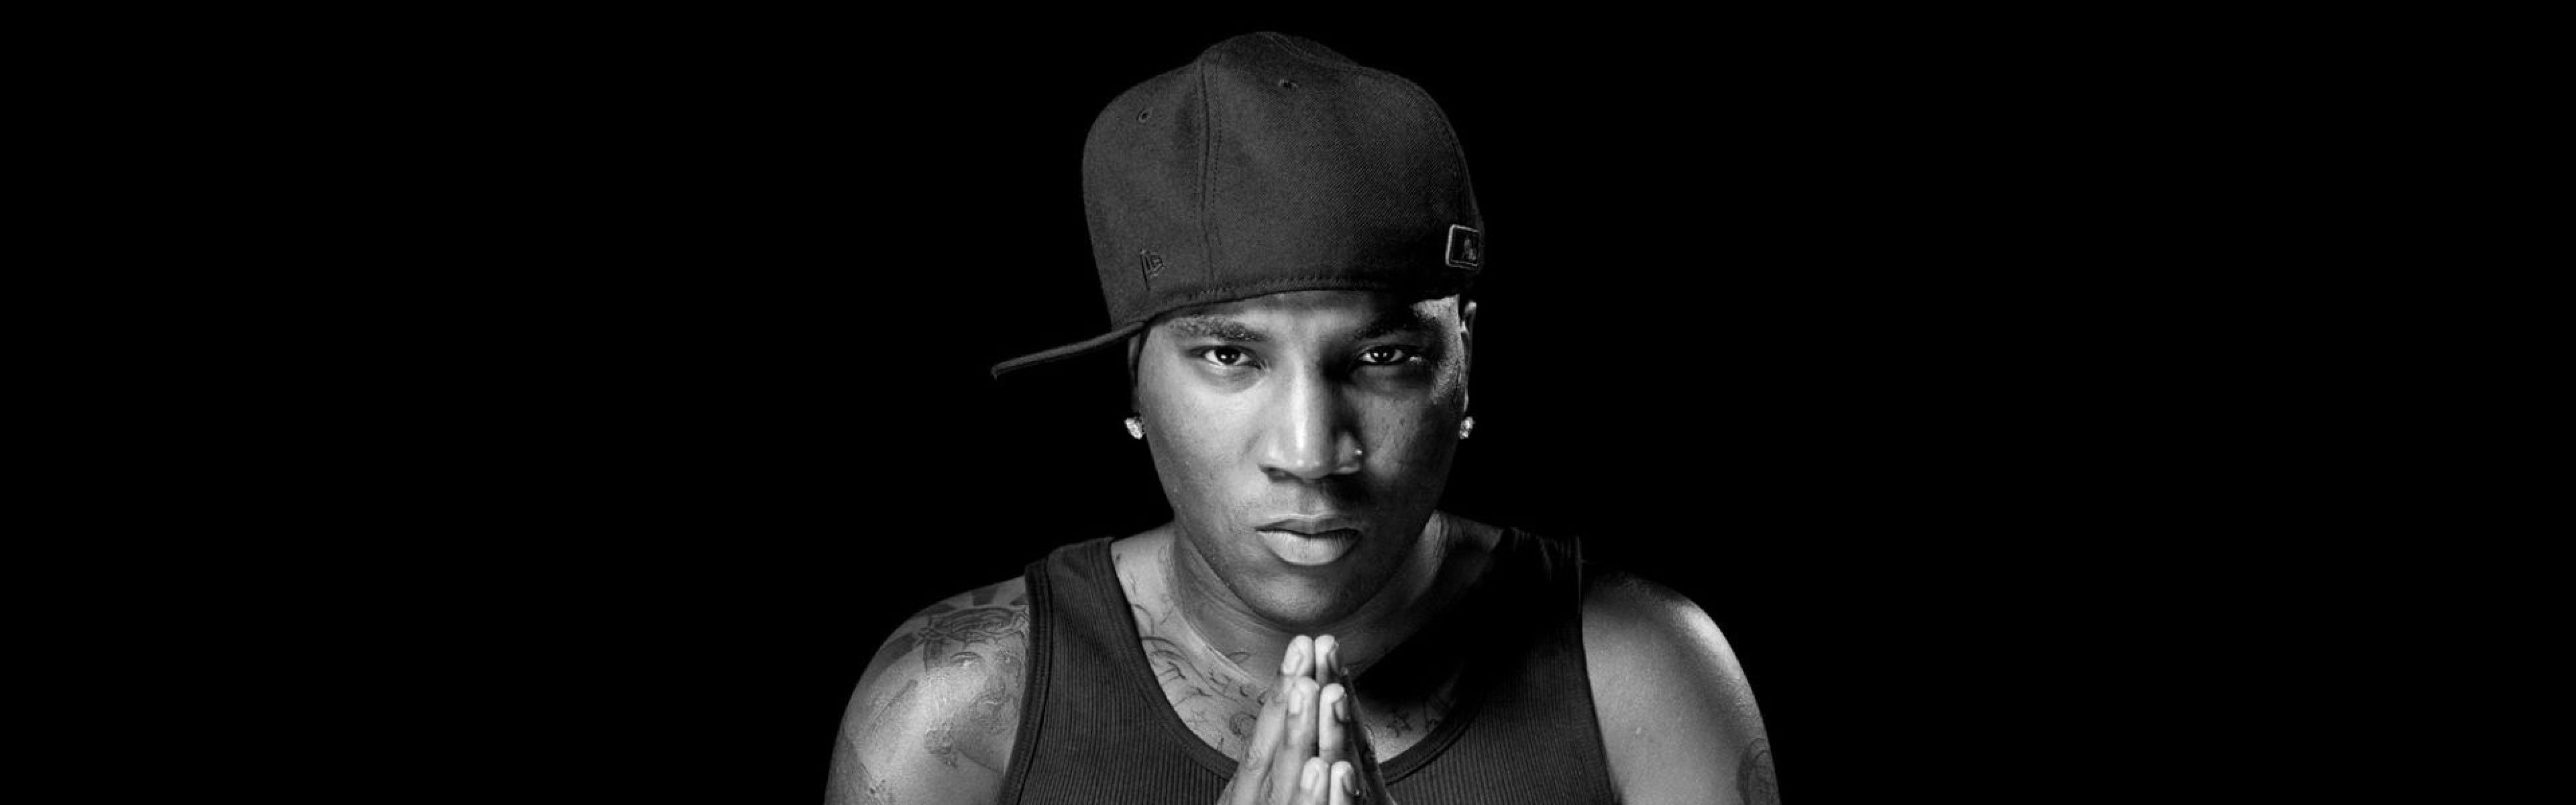 Young Jeezy Wallpapers - Top Free Young Jeezy Backgrounds 3840x1200